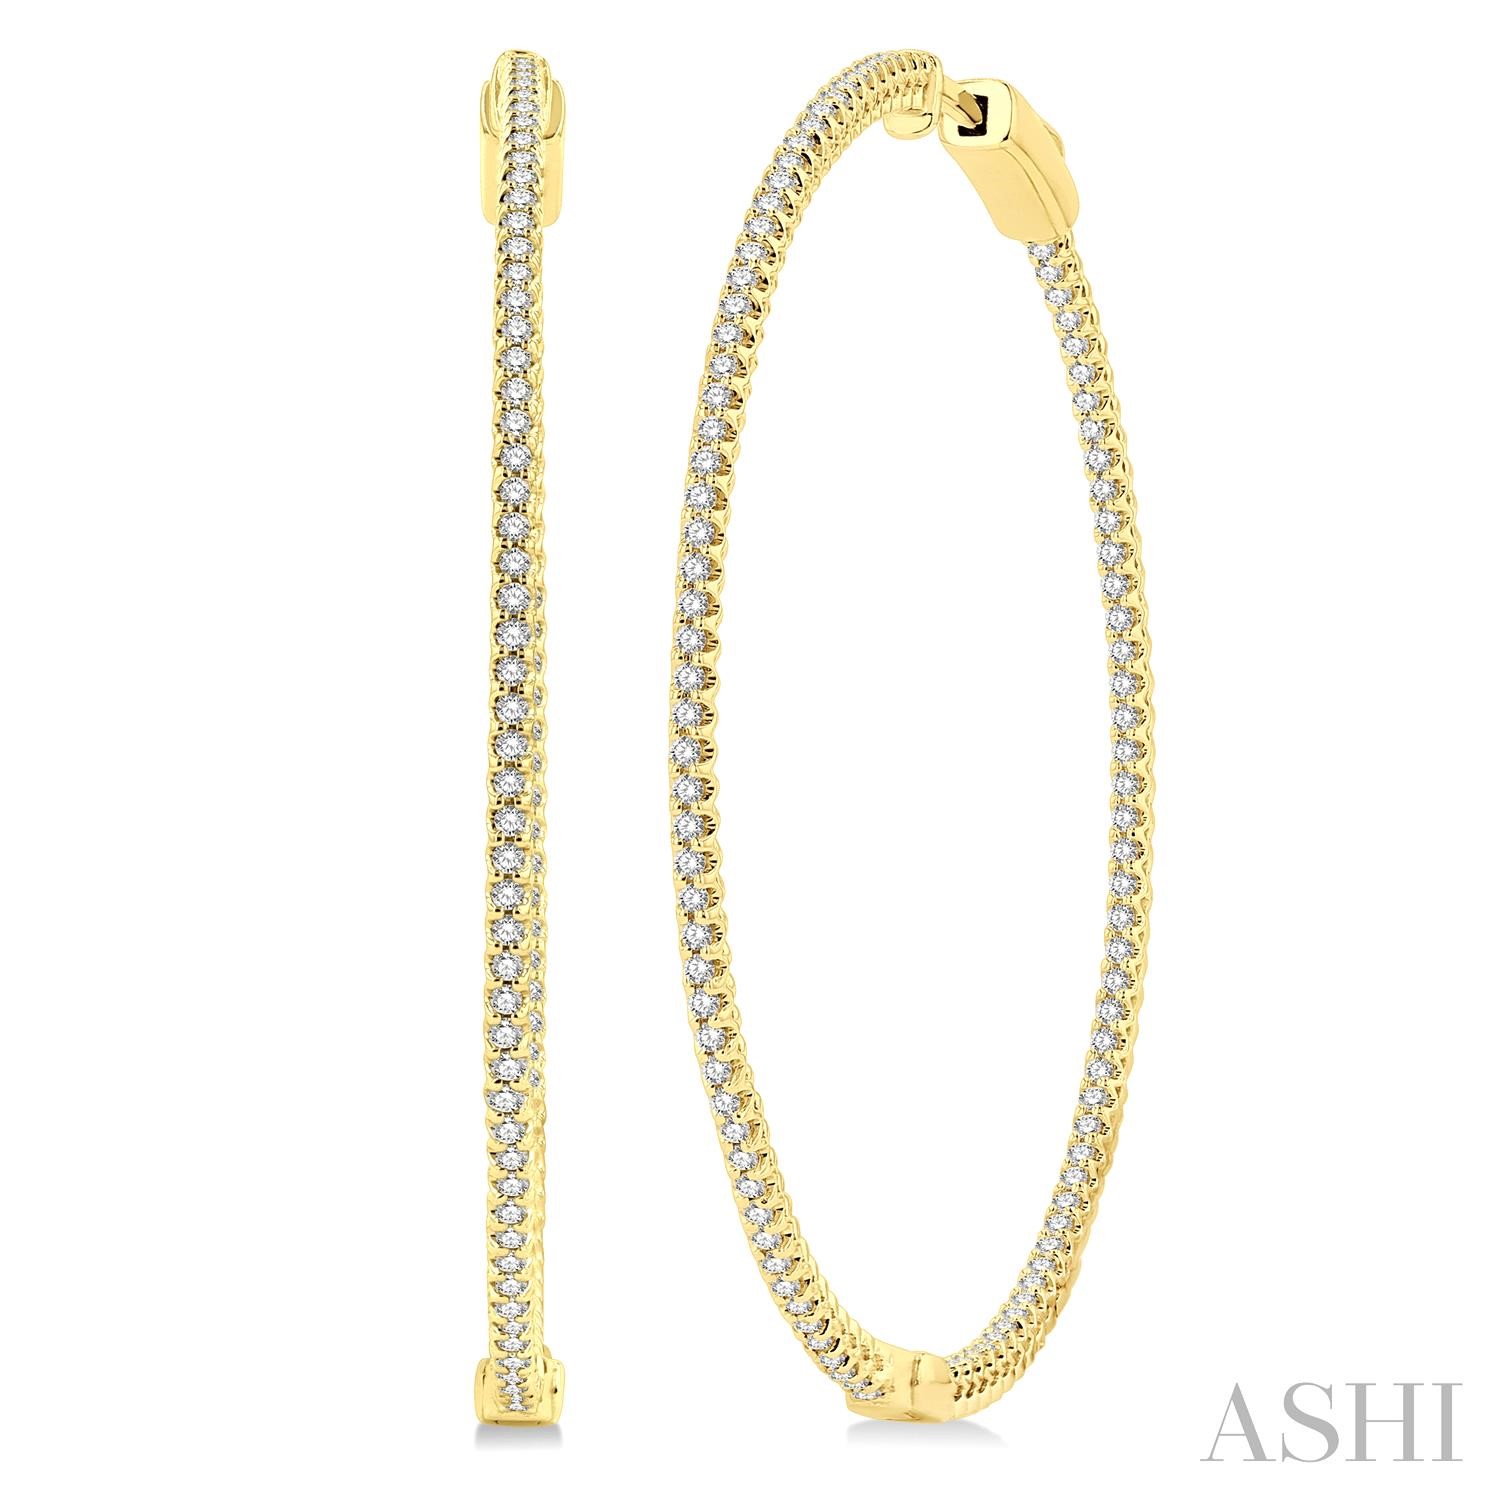 14K YELLOW GOLD INSIDE OUT HOOP 1-3/4